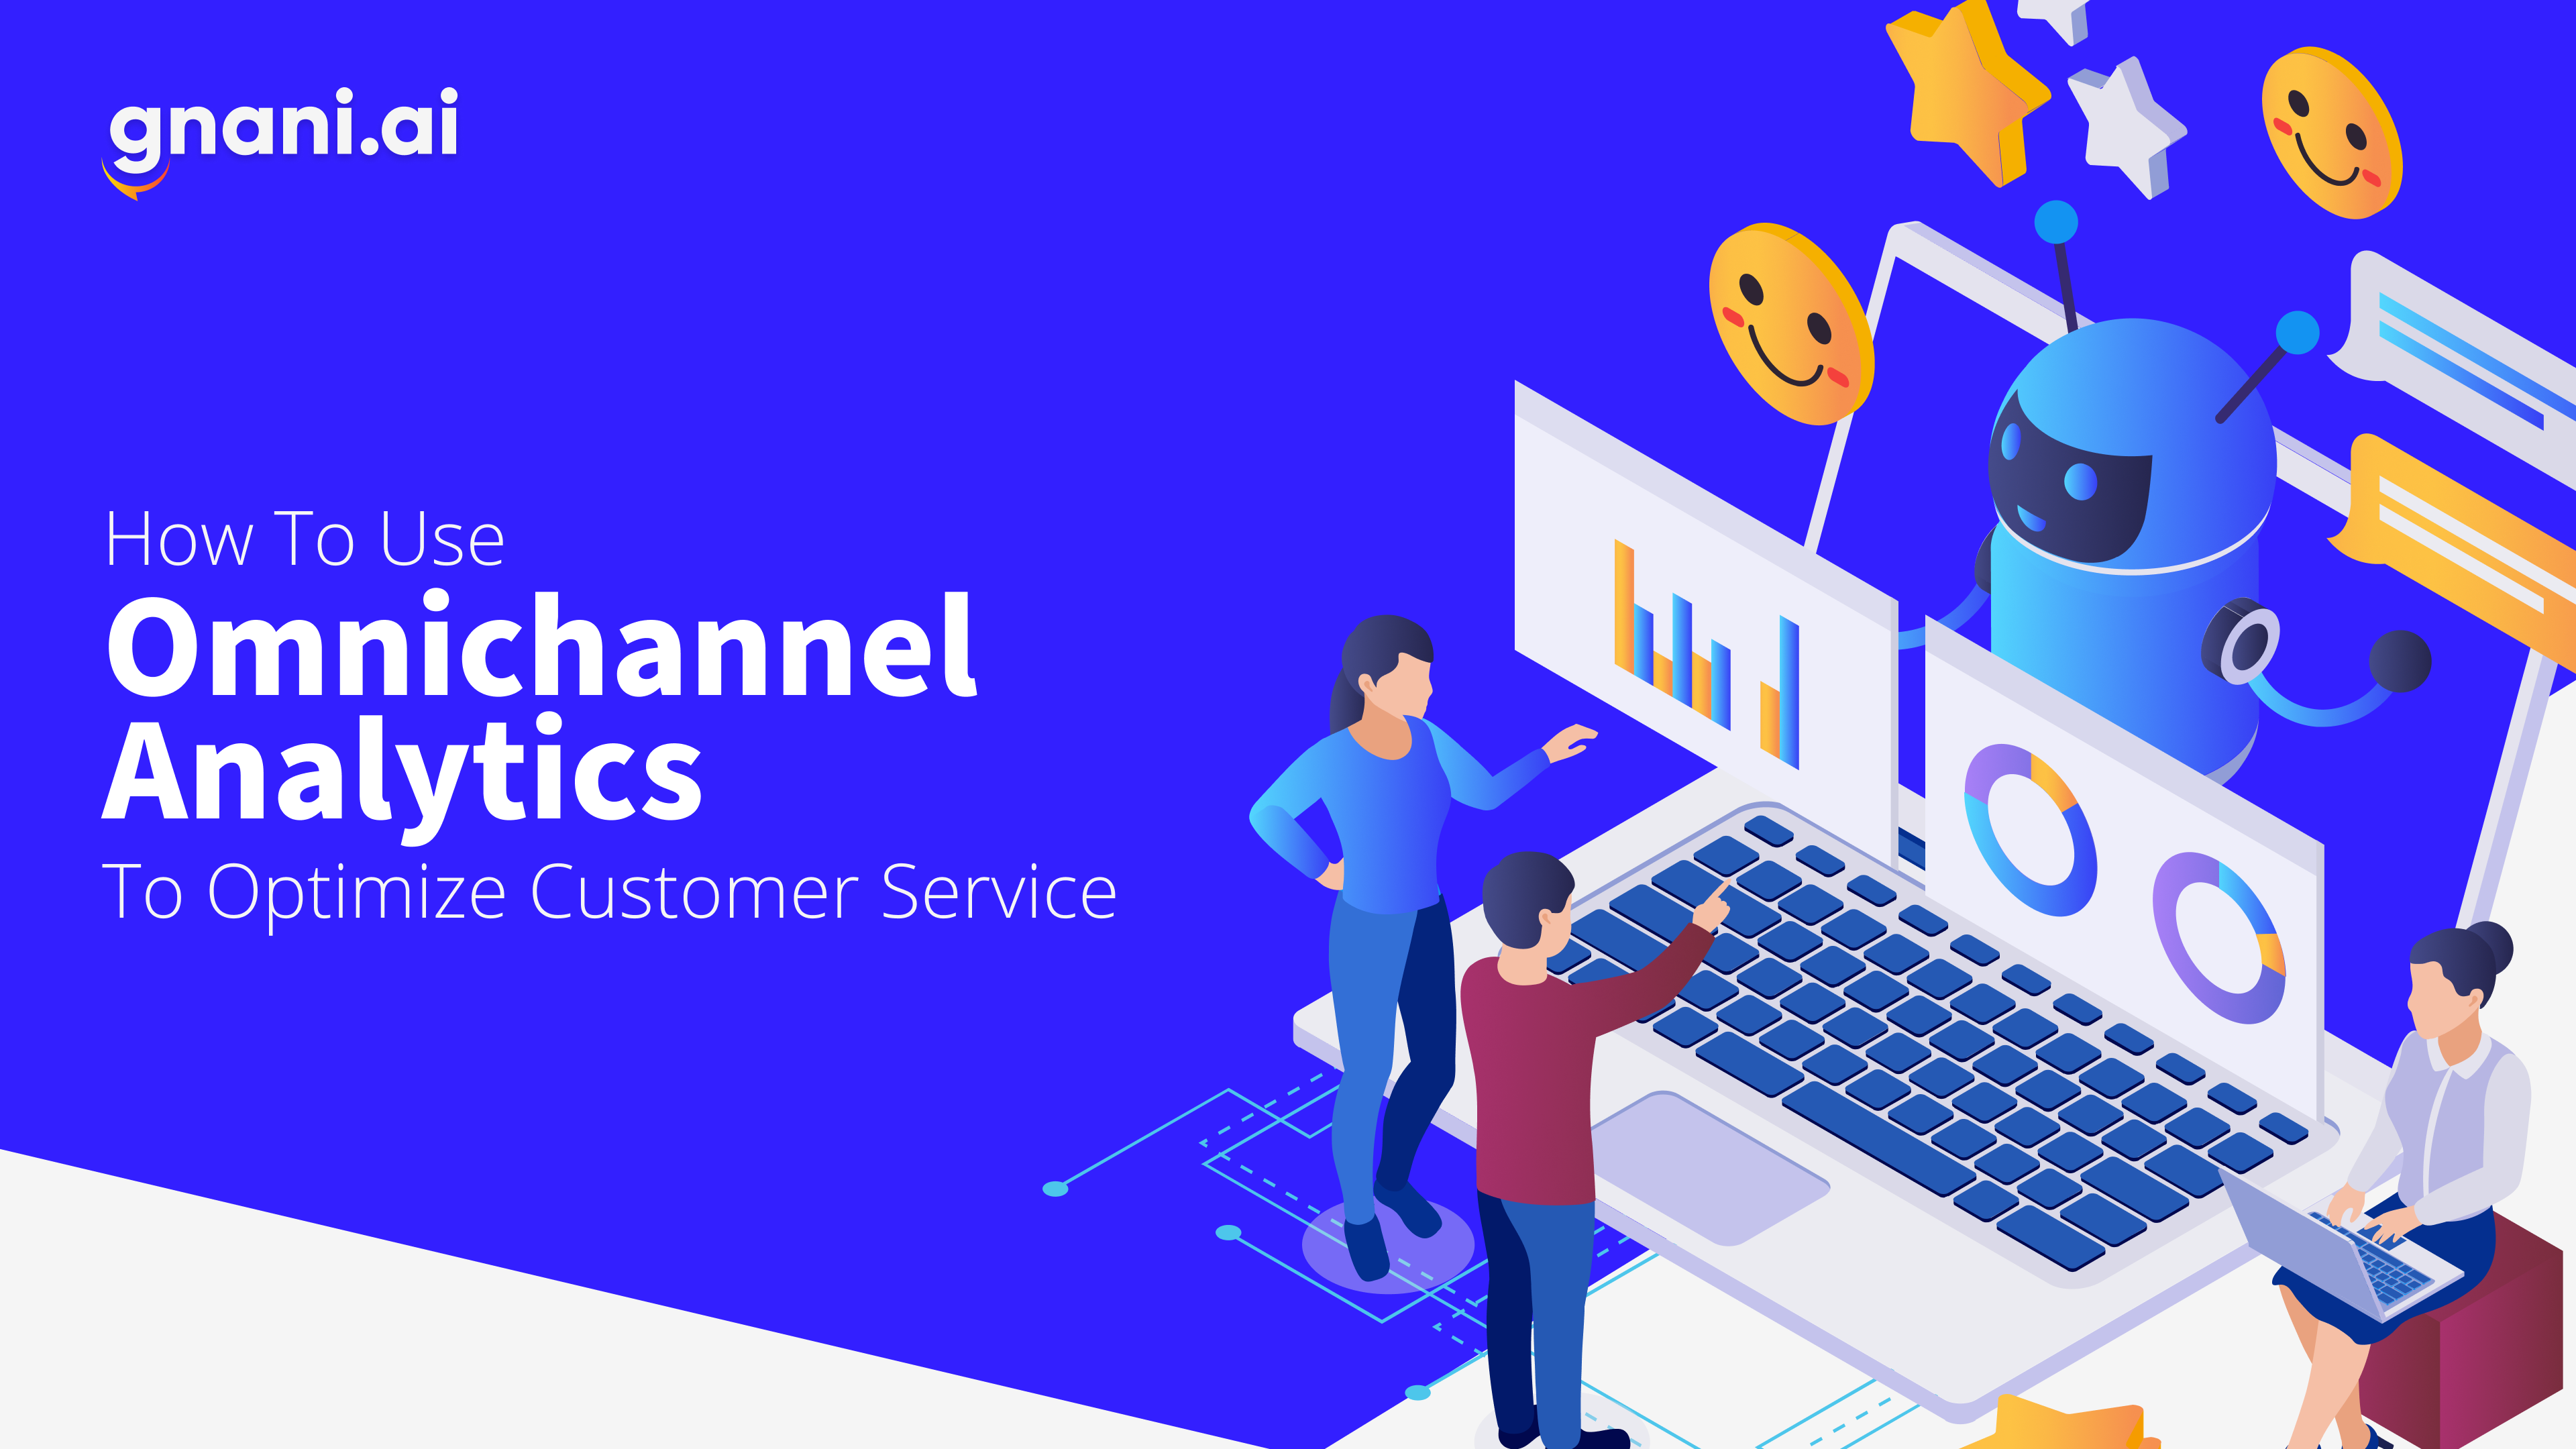 How to Use Omnichannel Analytics to Optimize Customer Service featured image